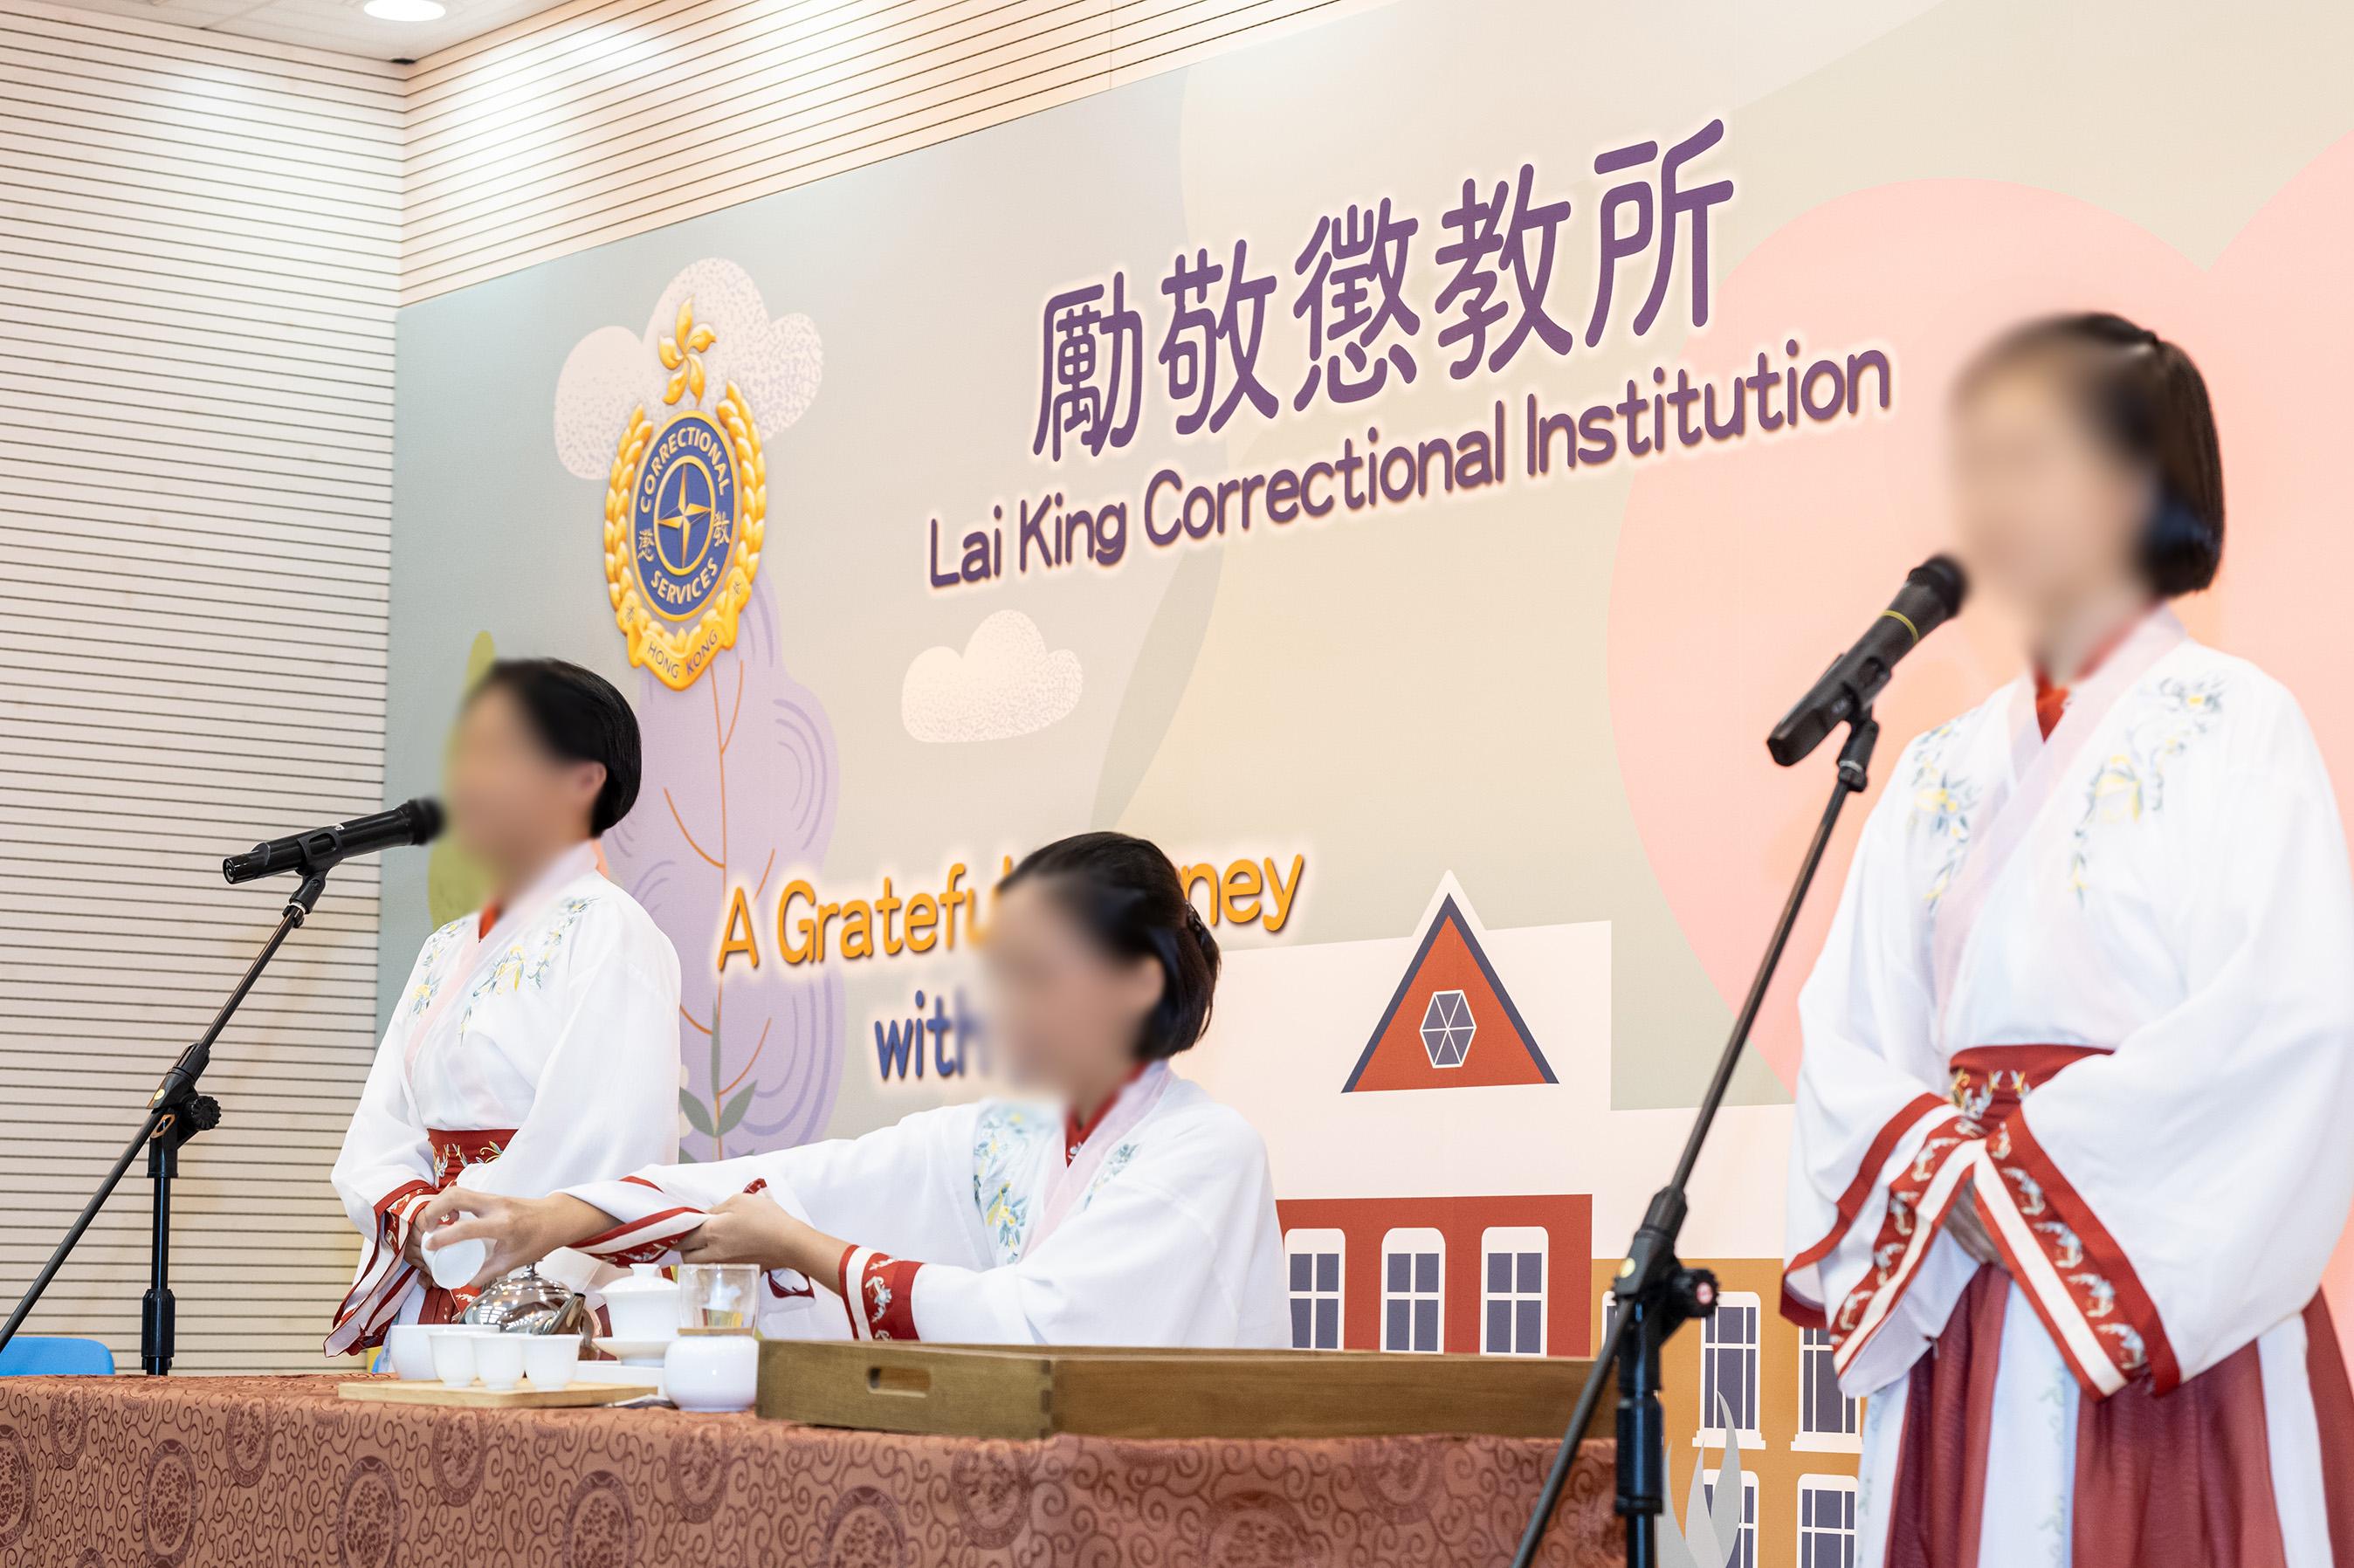 Young persons in custody at Lai King Correctional Institution of the Correctional Services Department were presented with certificates at a ceremony today (September 20) in recognition of their efforts and achievements in studies and vocational examinations. Photo shows young persons in custody performing a Chinese tea ceremony demonstration at the ceremony.